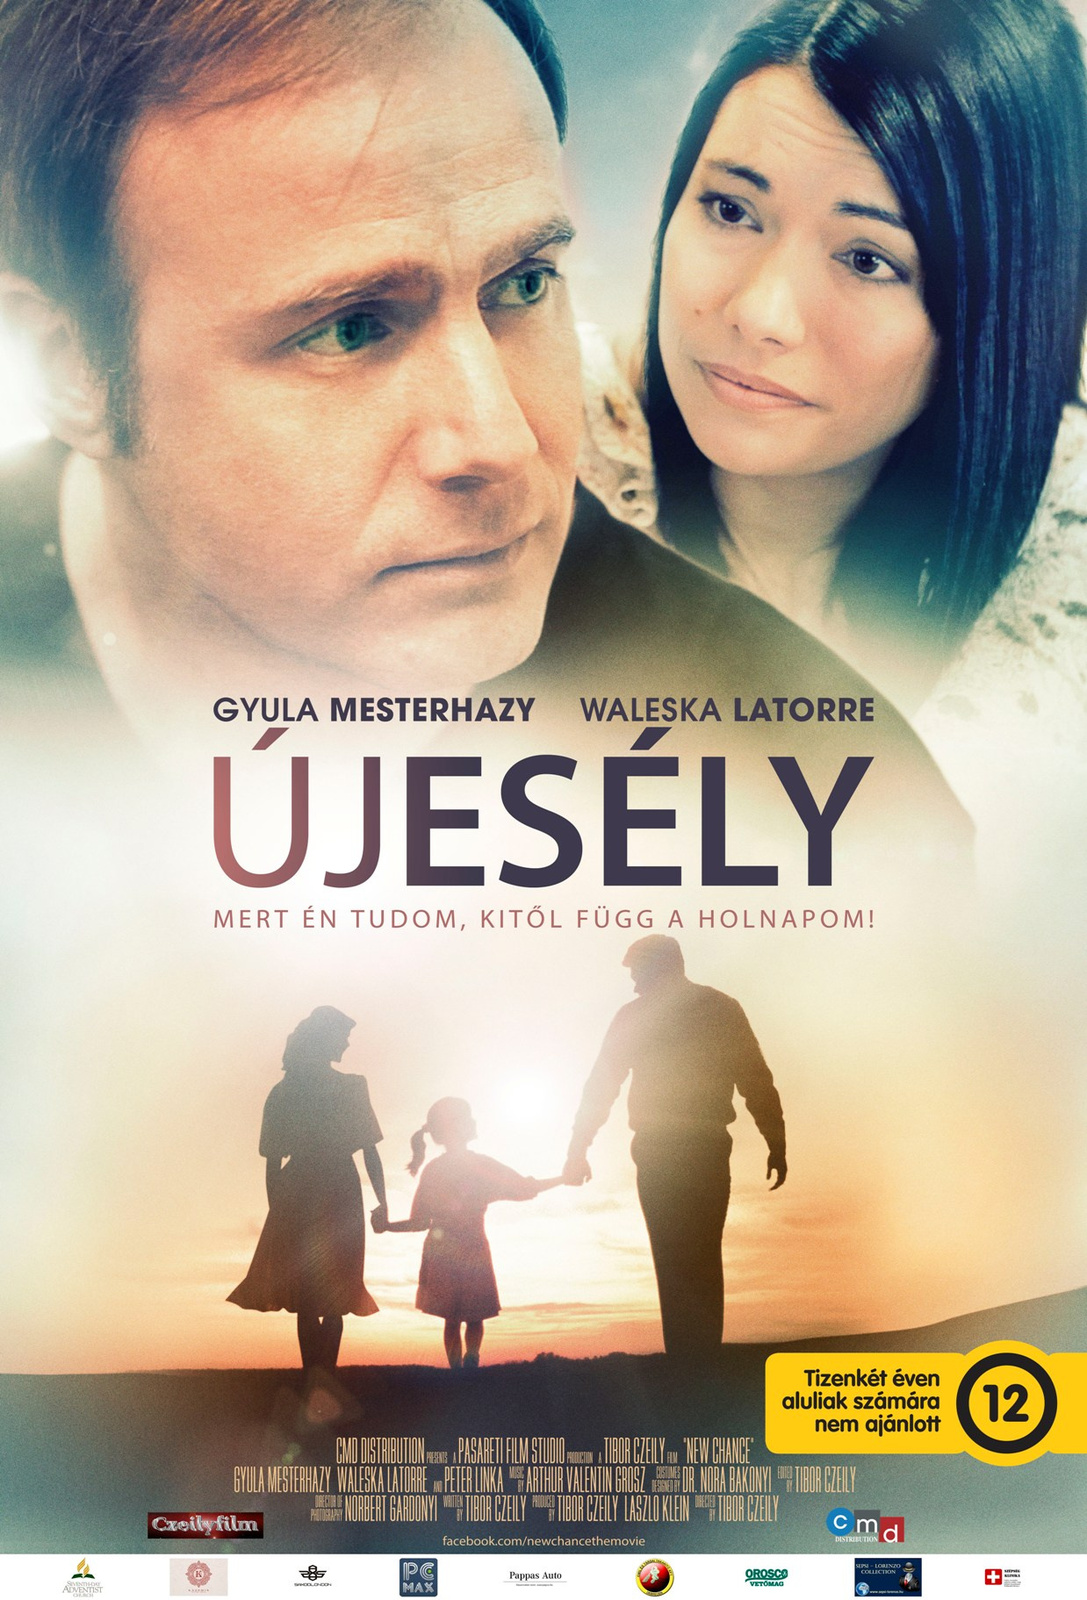 ujesely